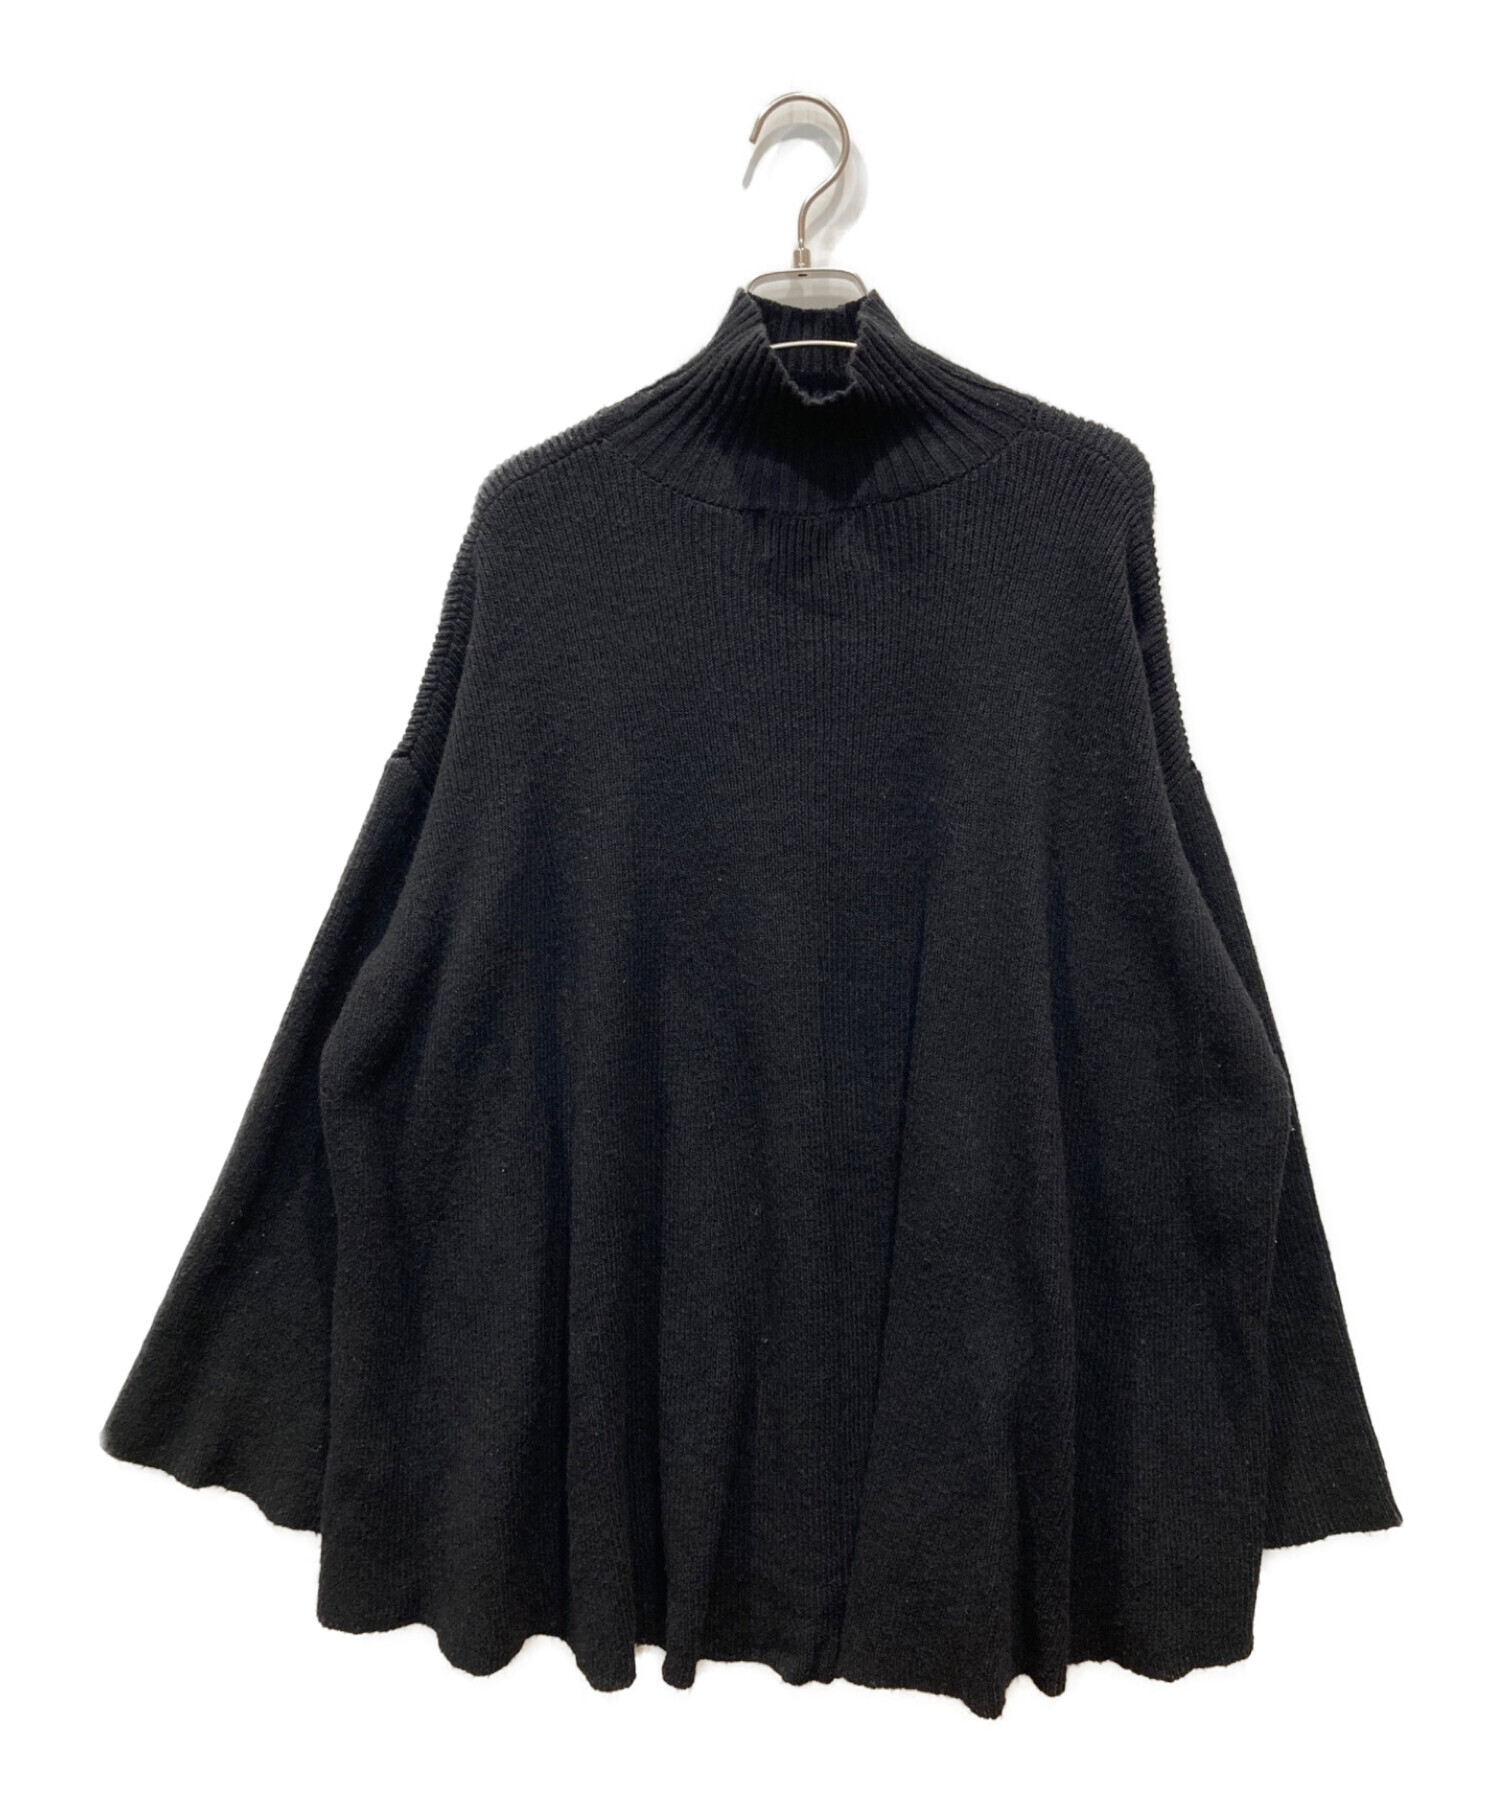 CLANE 2WAY CAPE KNIT TOPS